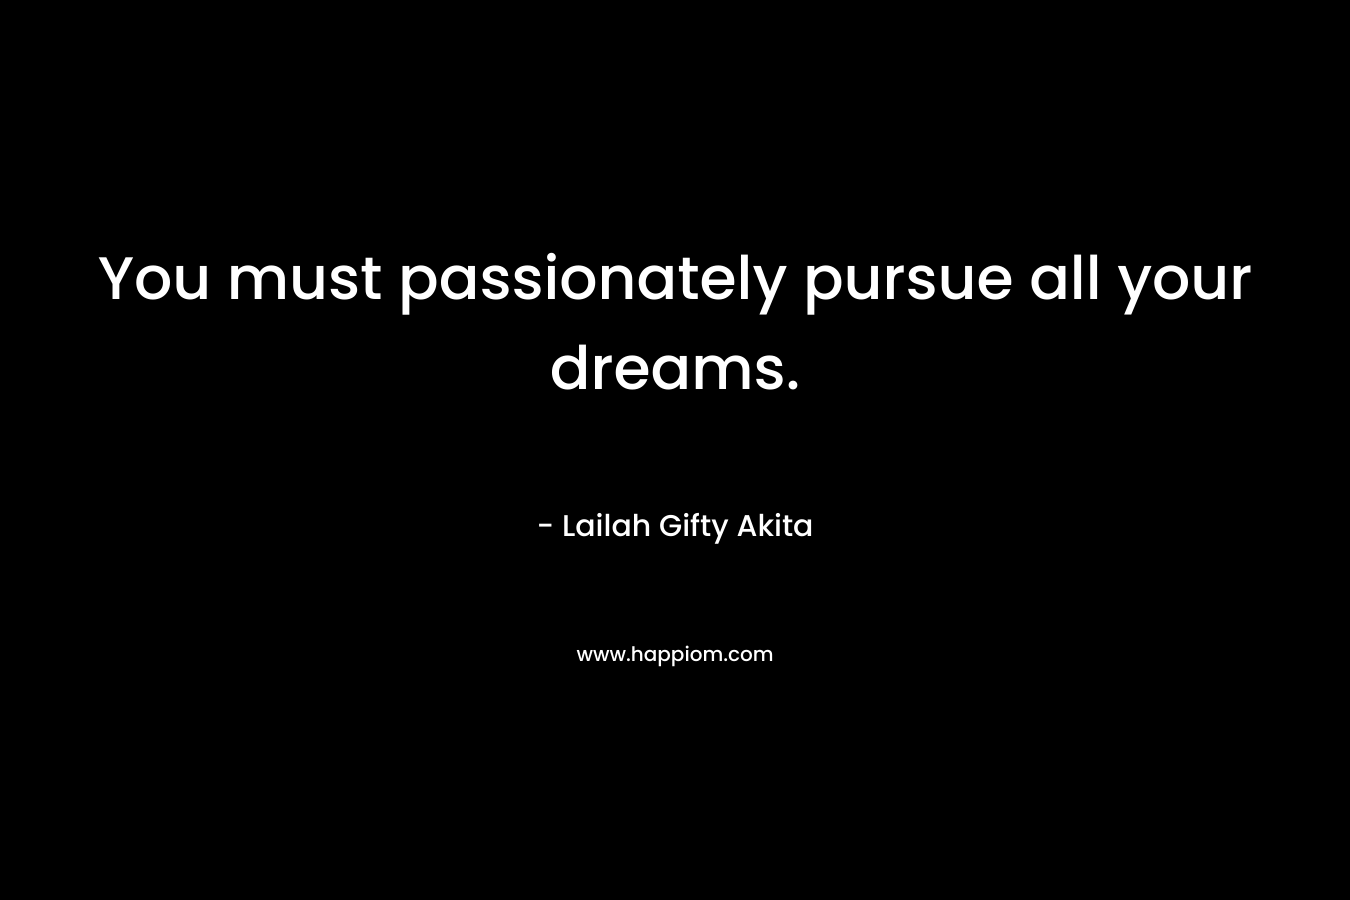 You must passionately pursue all your dreams.